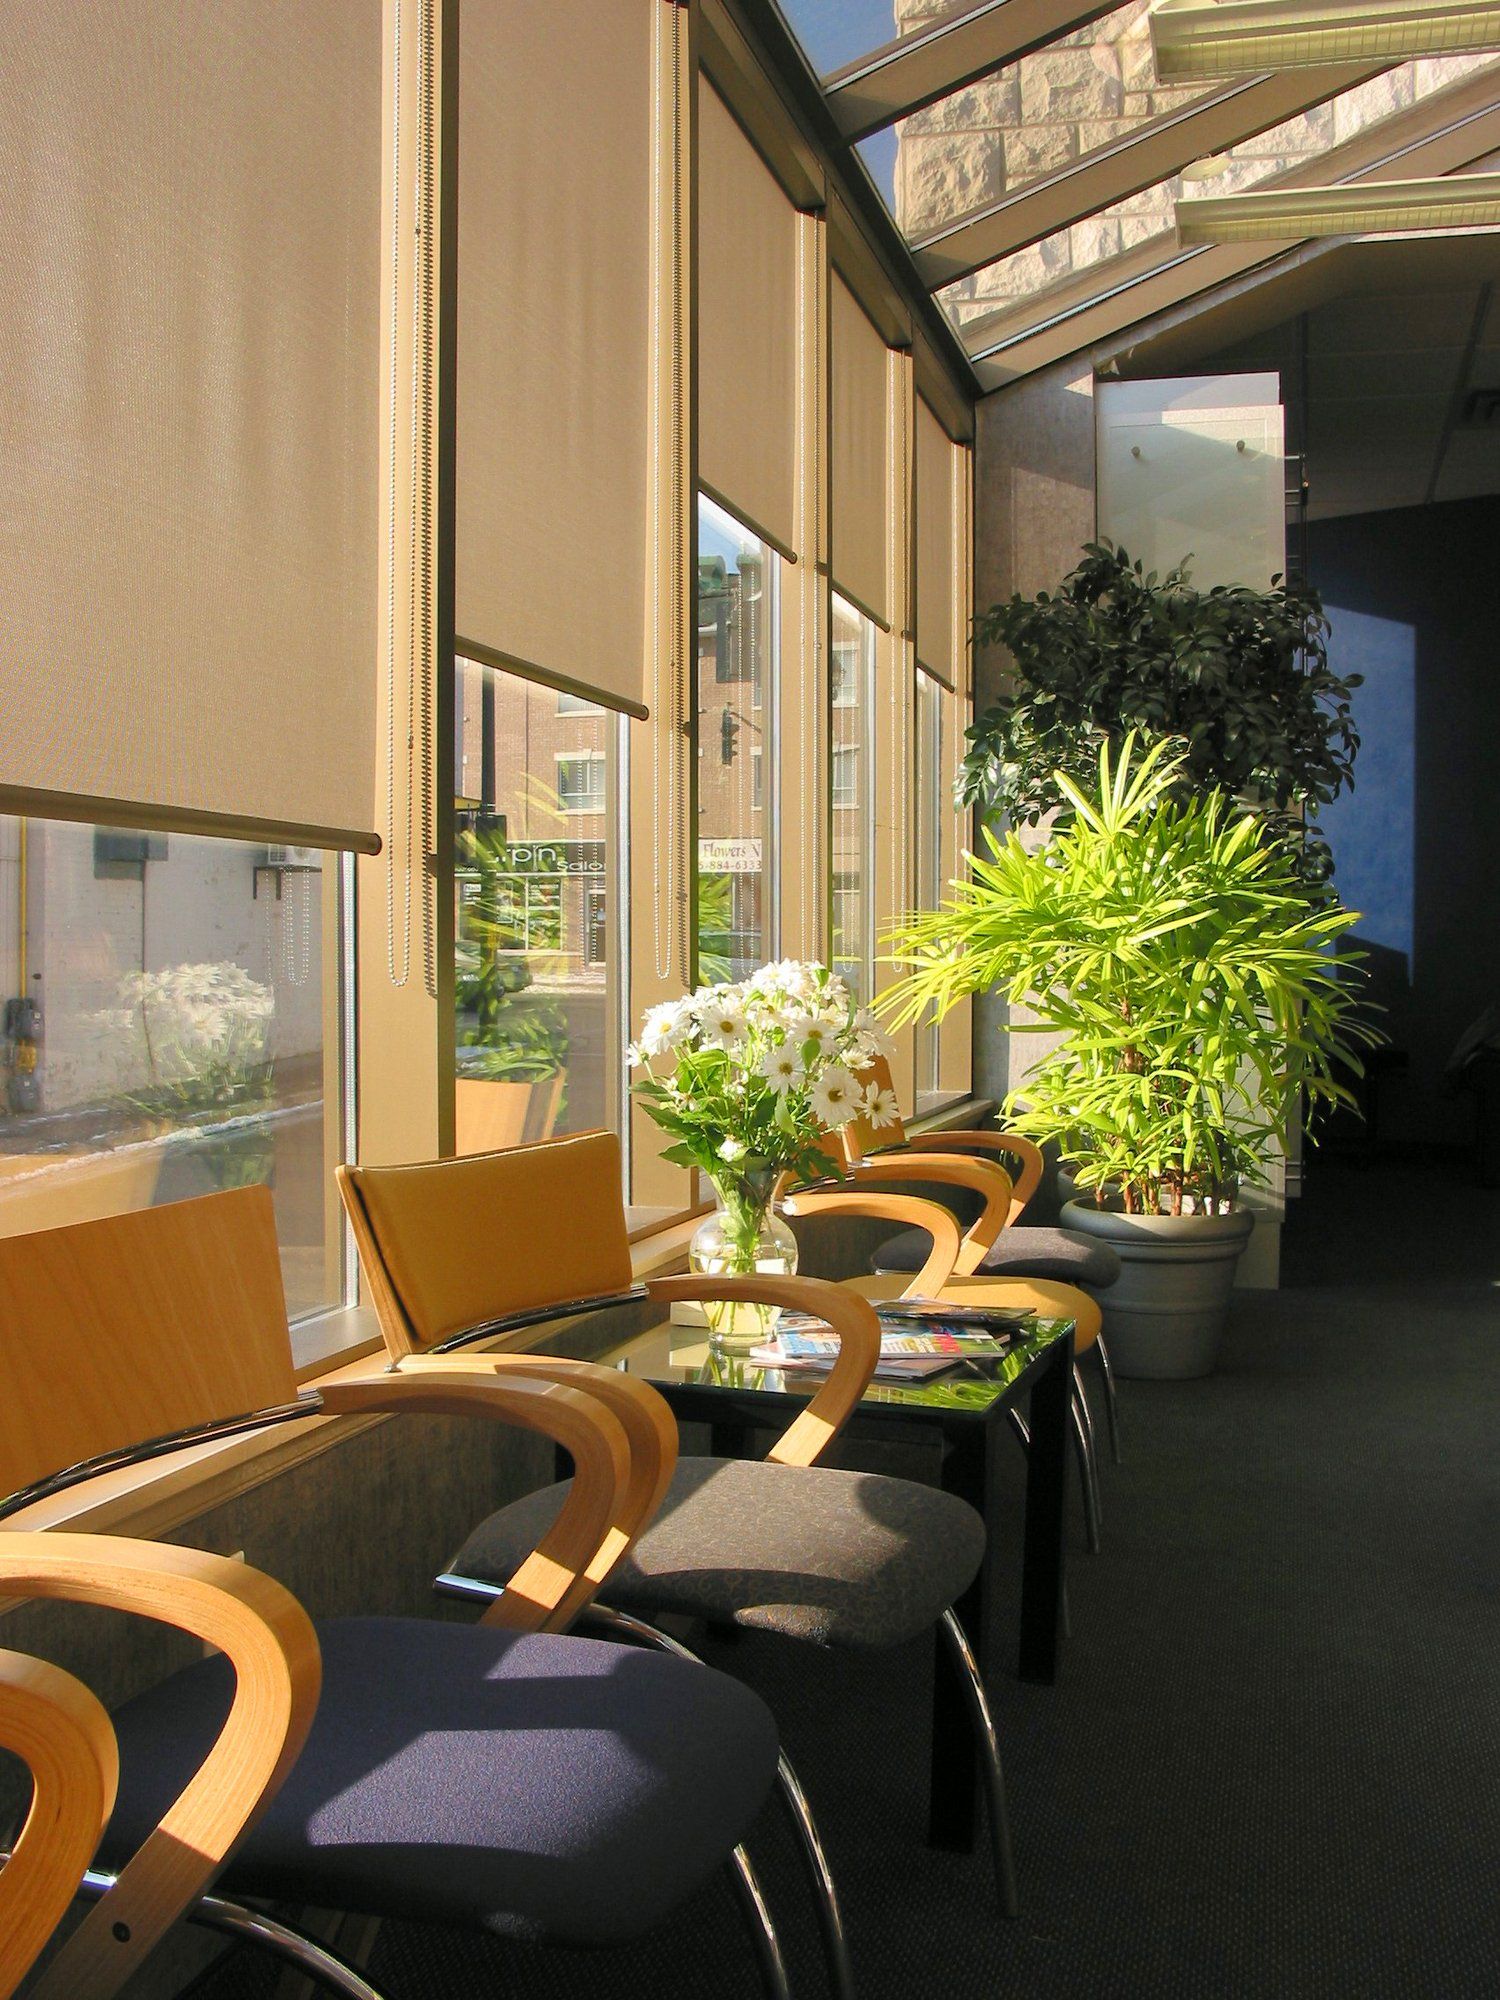 Chairs lined up against windows in office waiting room, with potted plants, below sectioned windows with roller blinds pulled up to different heights.